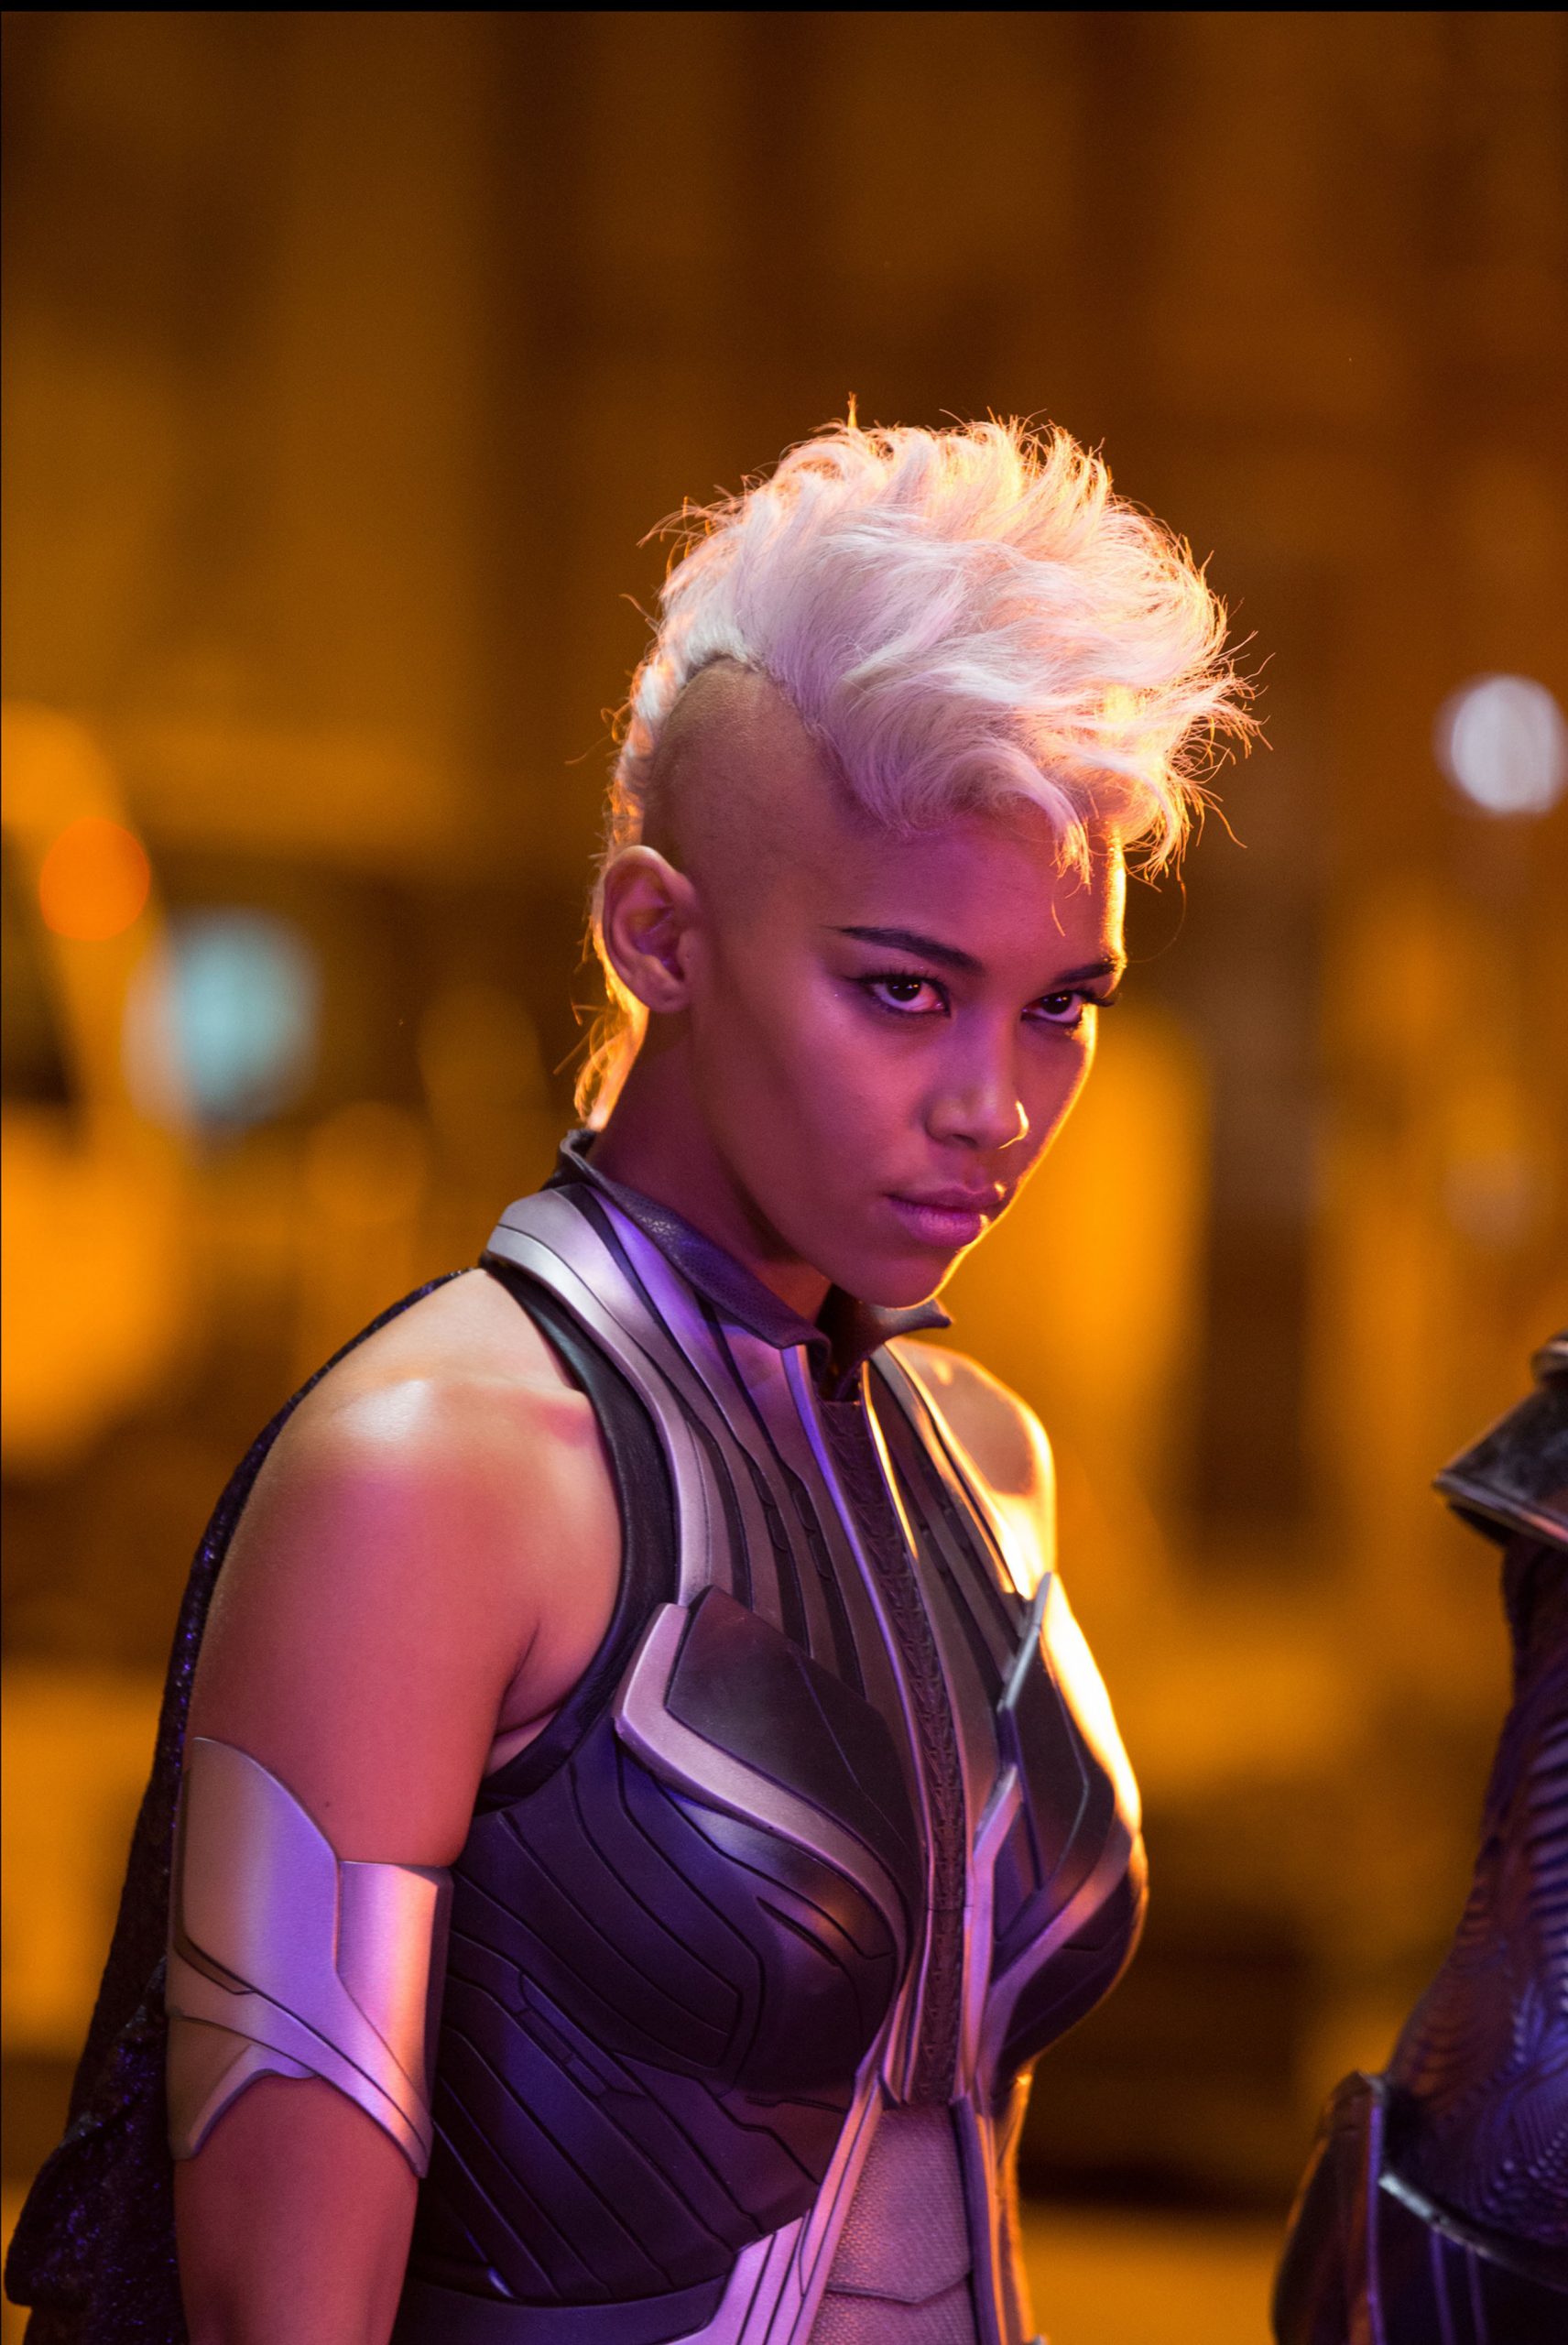 bella mclean recommends photos of storm from xmen pic